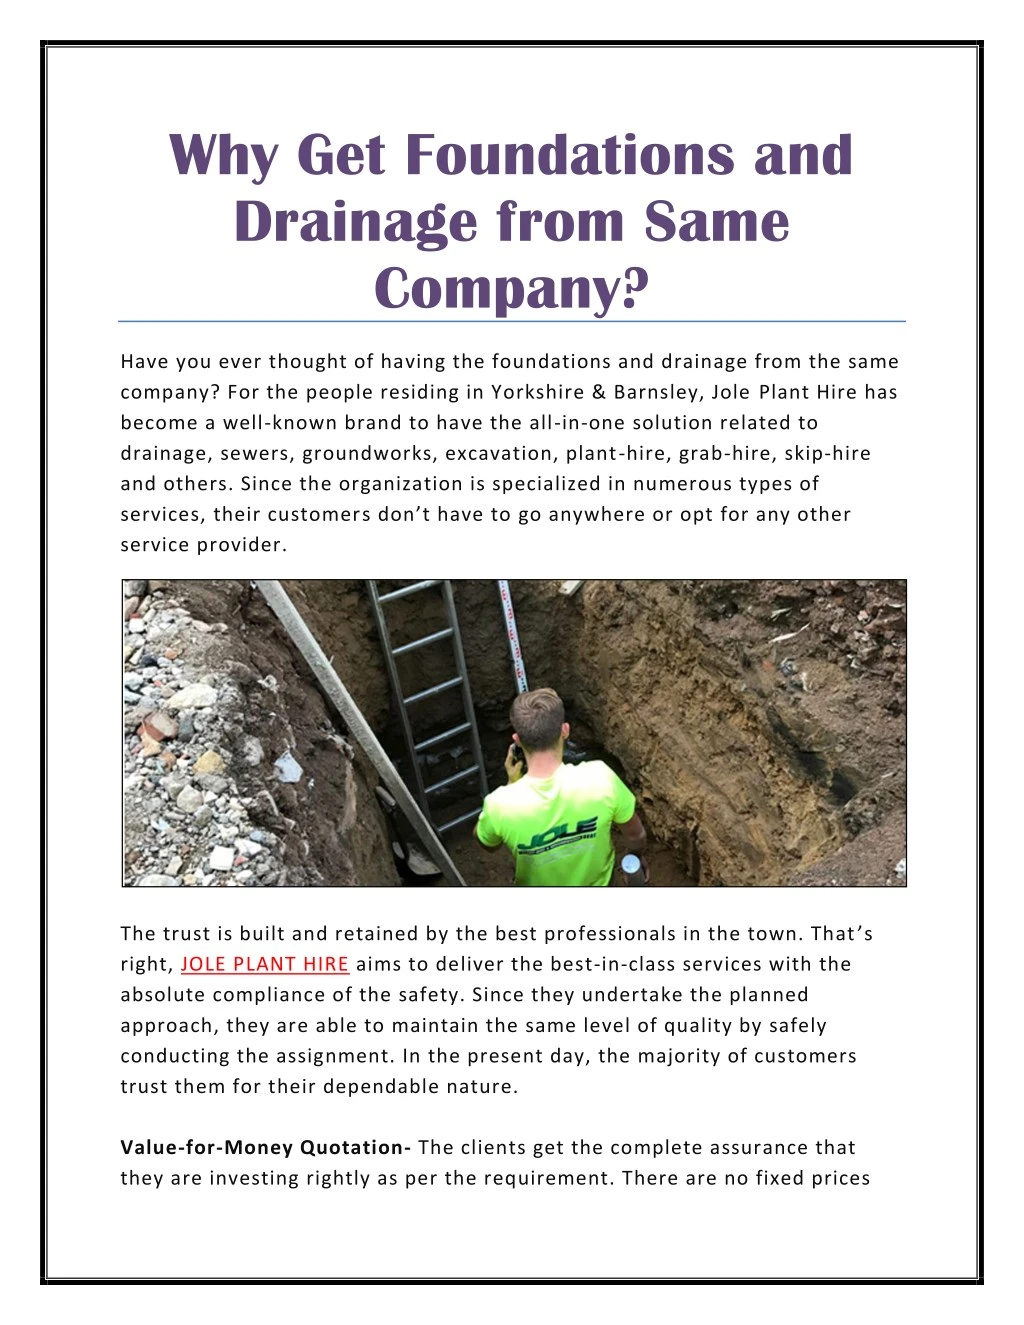 why get foundations and drainage from same company